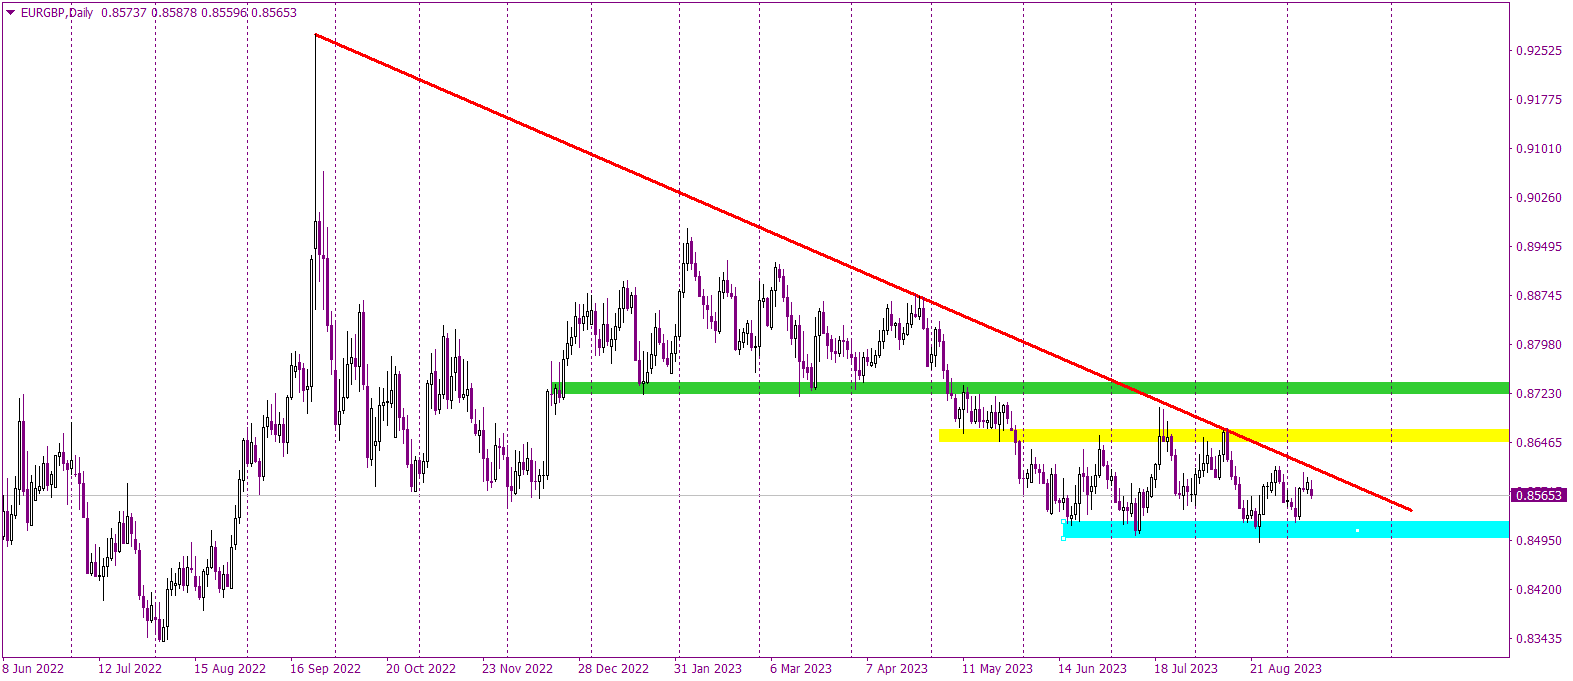 Will the EURGBP Dive Deeper or Rebound? Key Levels to Watch